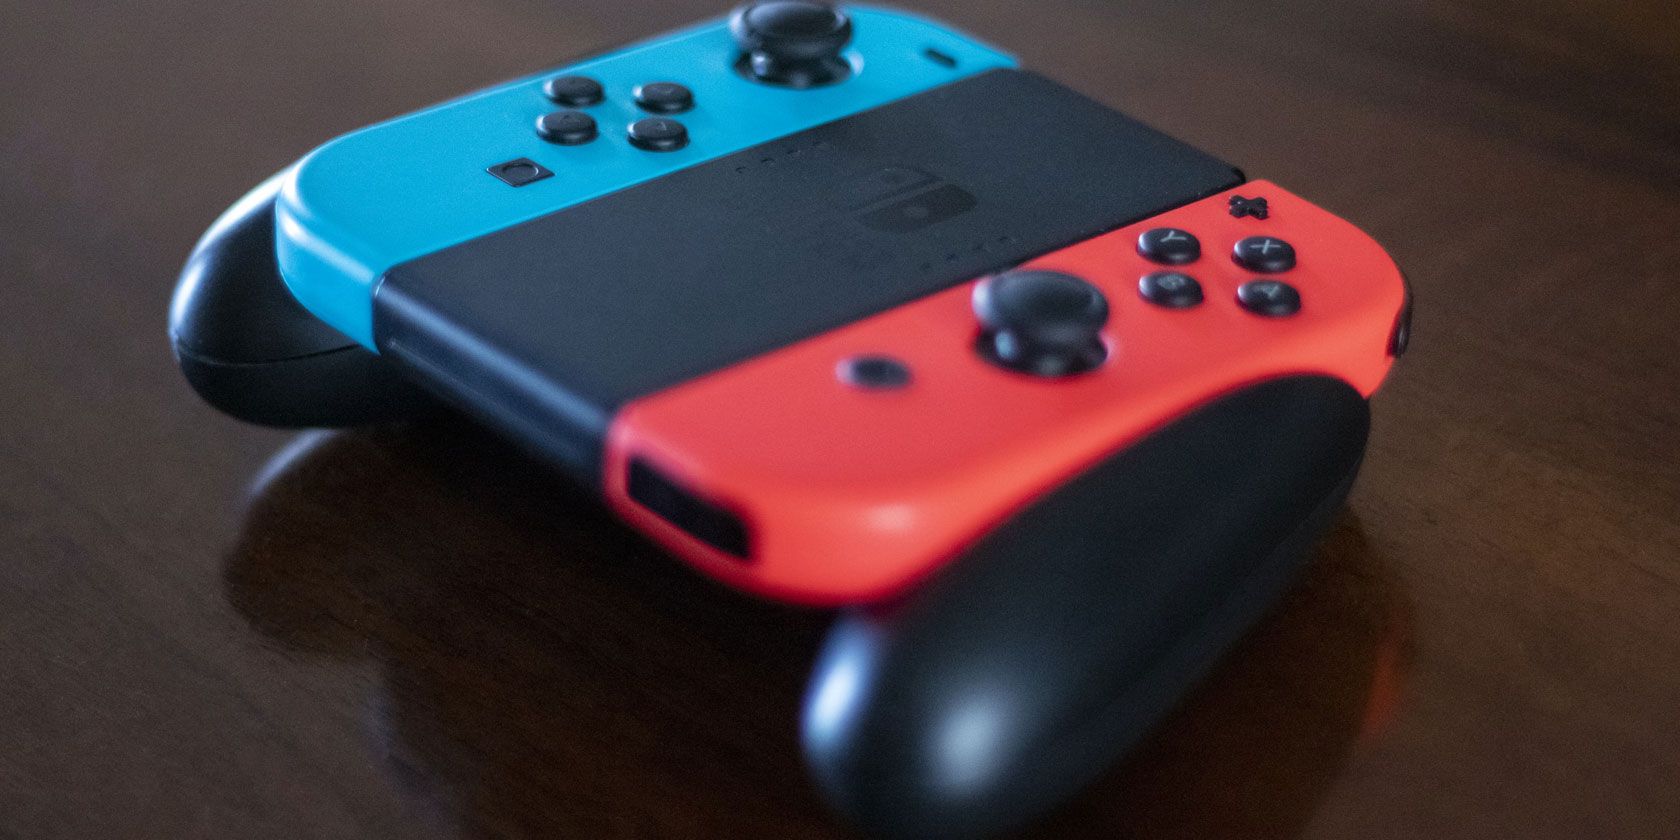 9 Ways to Customize Your Nintendo Switch and Make It Your Own